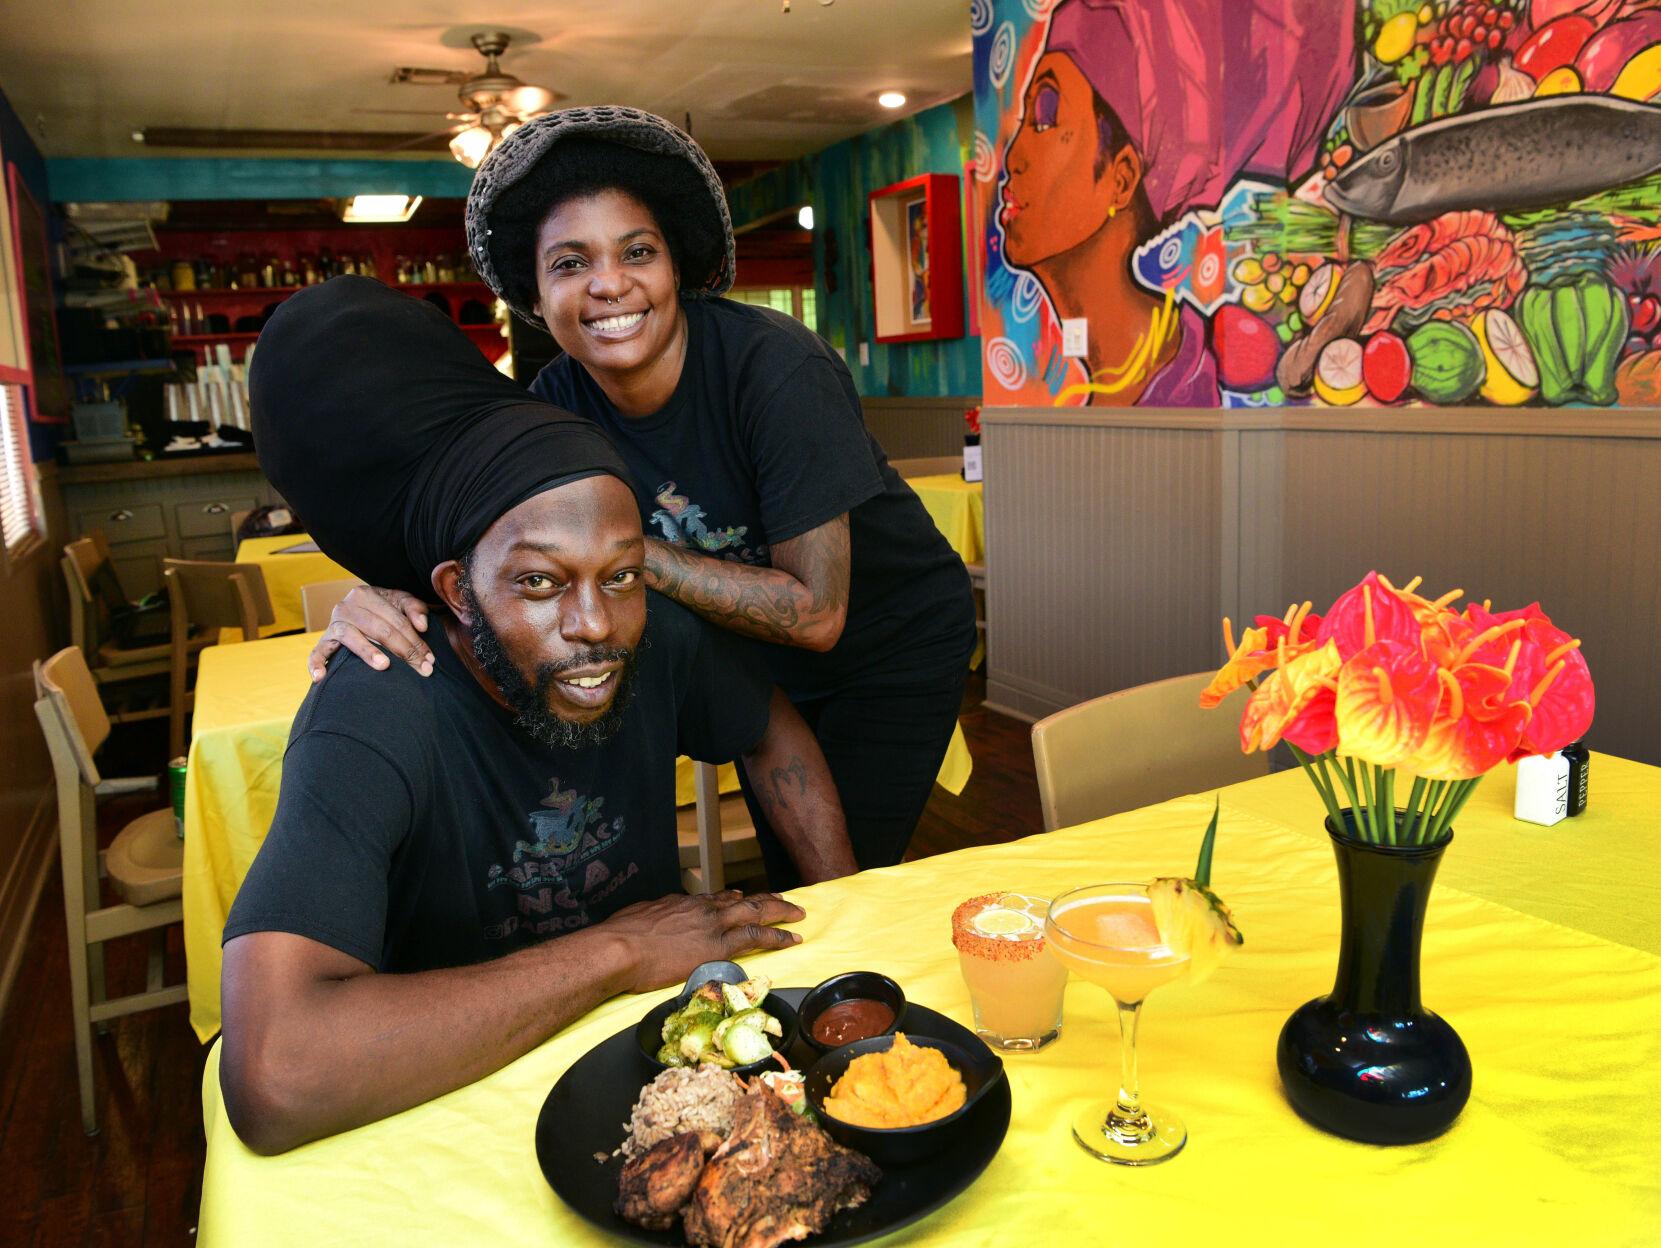 Afrodisiac blends Jamaican and Creole cuisines in Gentilly | Food and ...